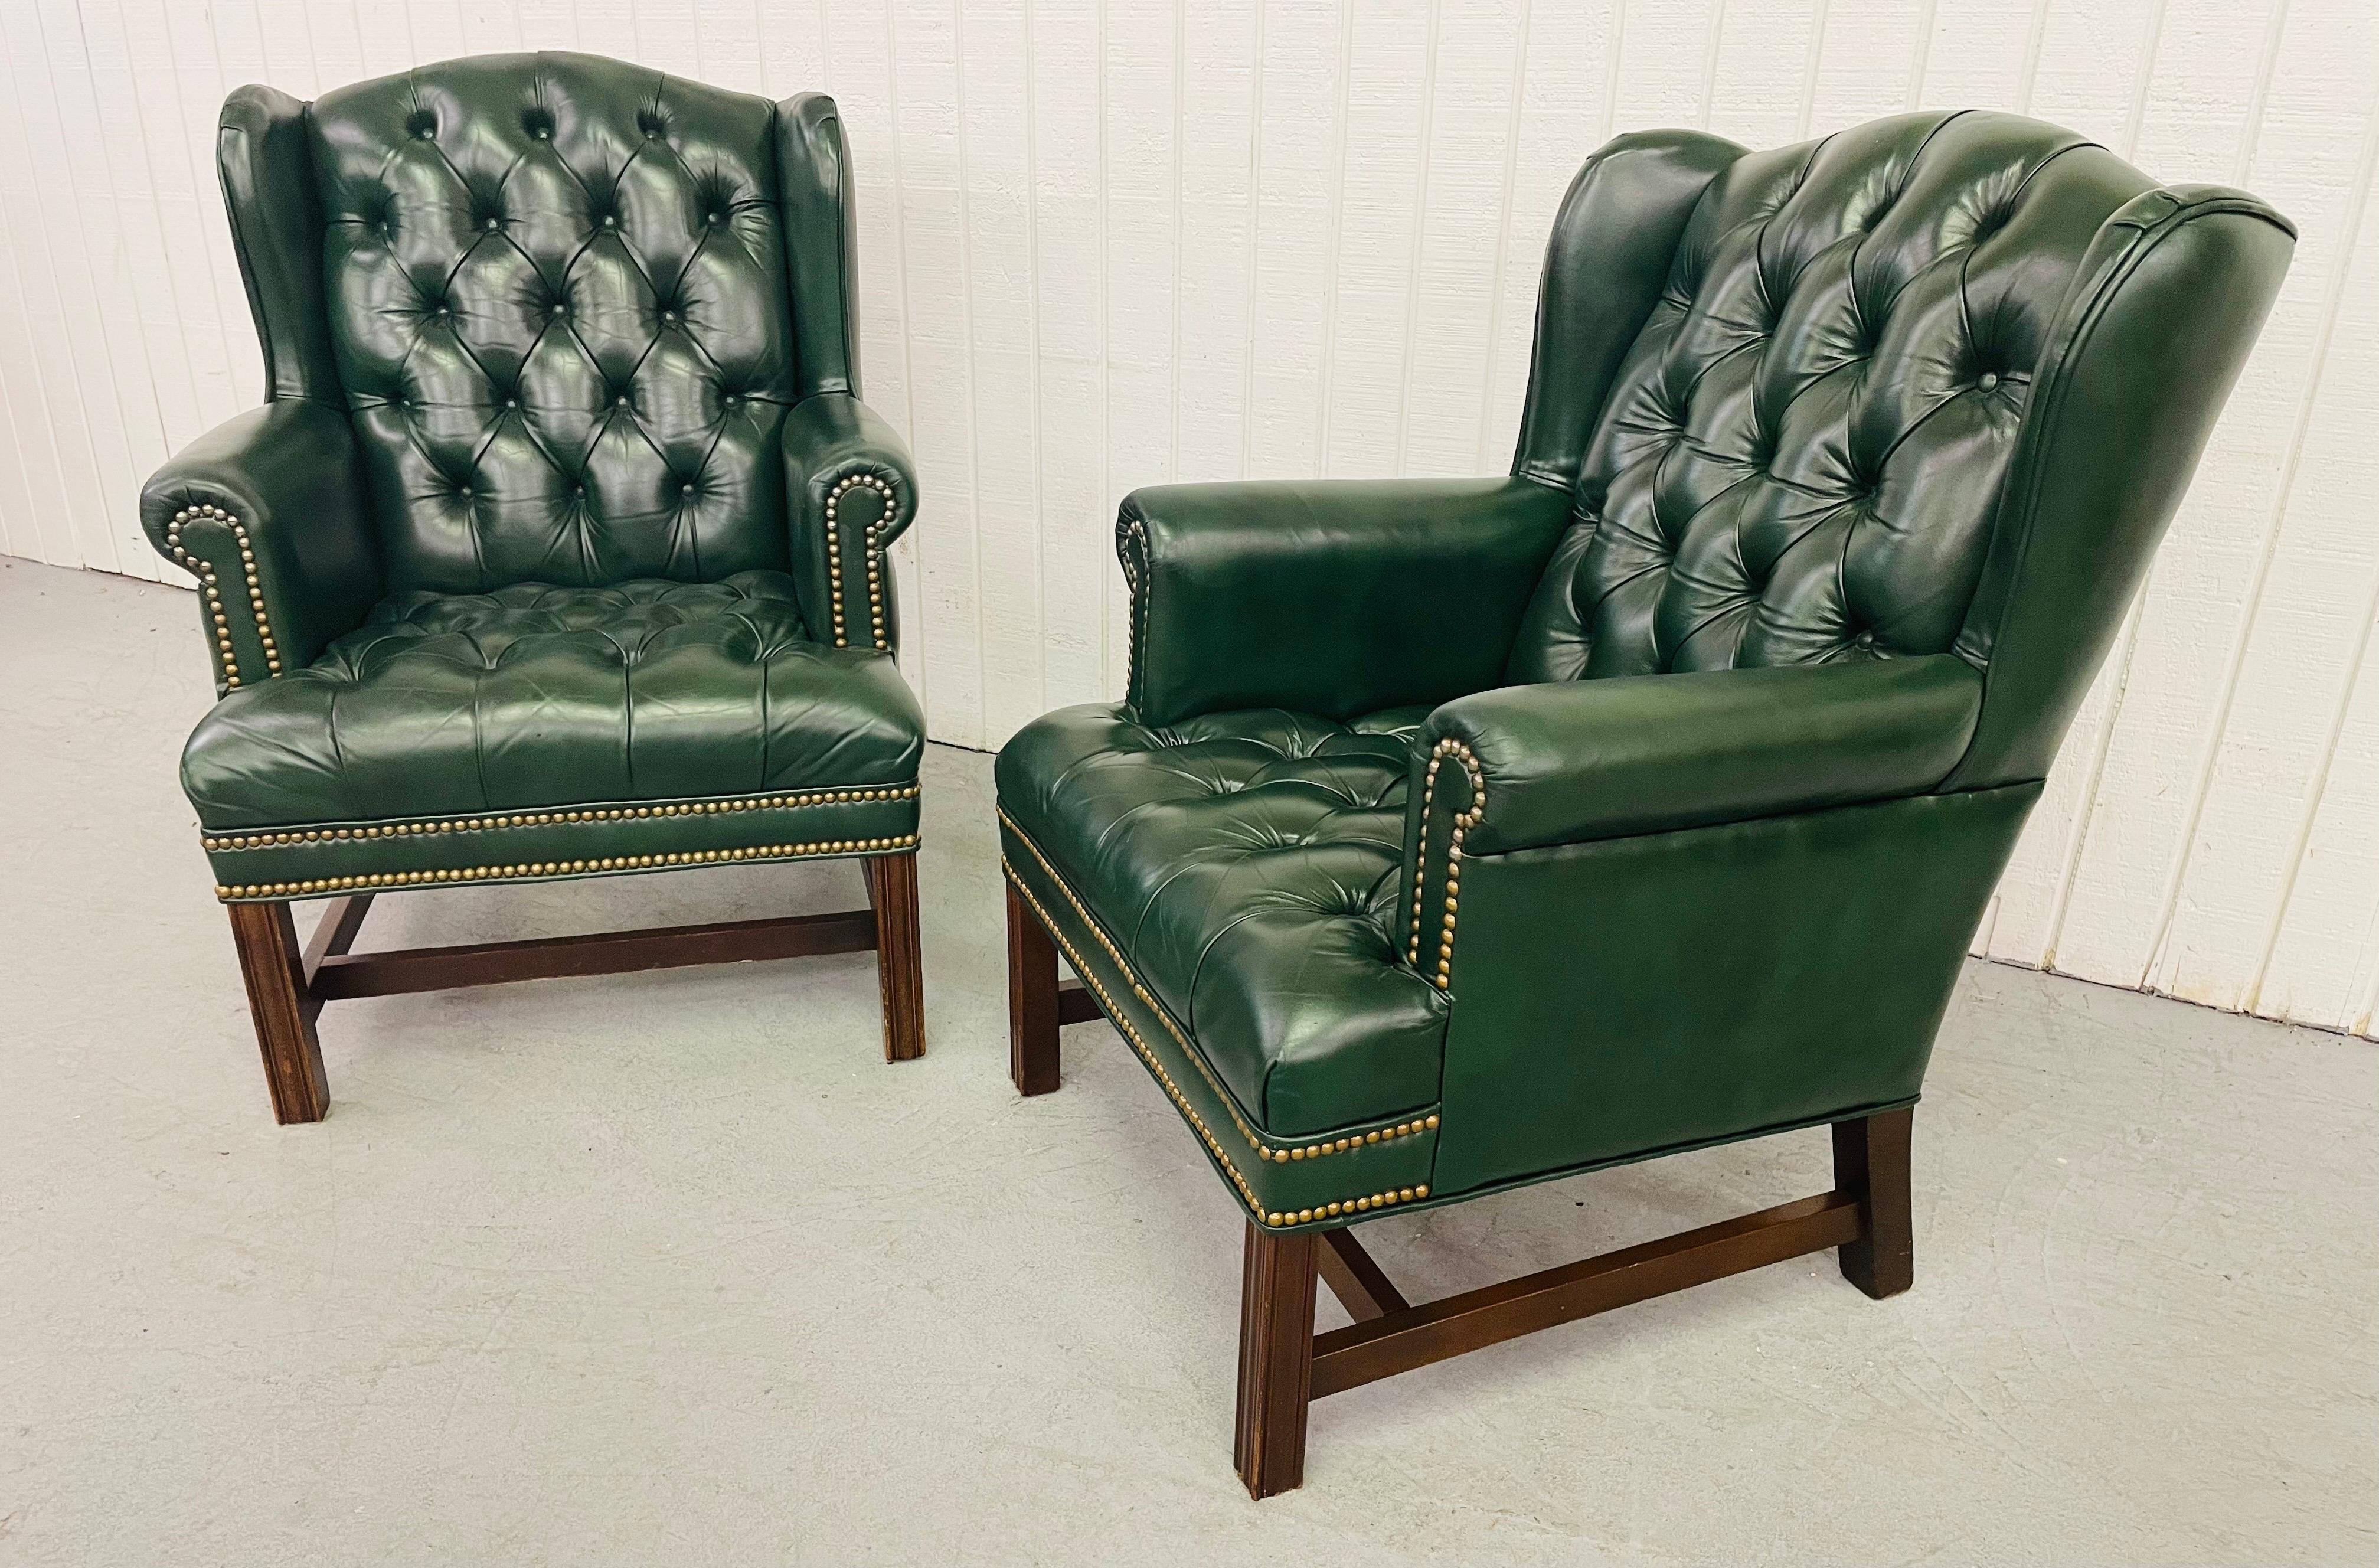 This listing is for a pair of vintage Green Chesterfield Wingback Leather Arm Chairs. Featuring a earthy green leather upholstery, tufted backs and seats, nailhead accents, and mahogany legs.